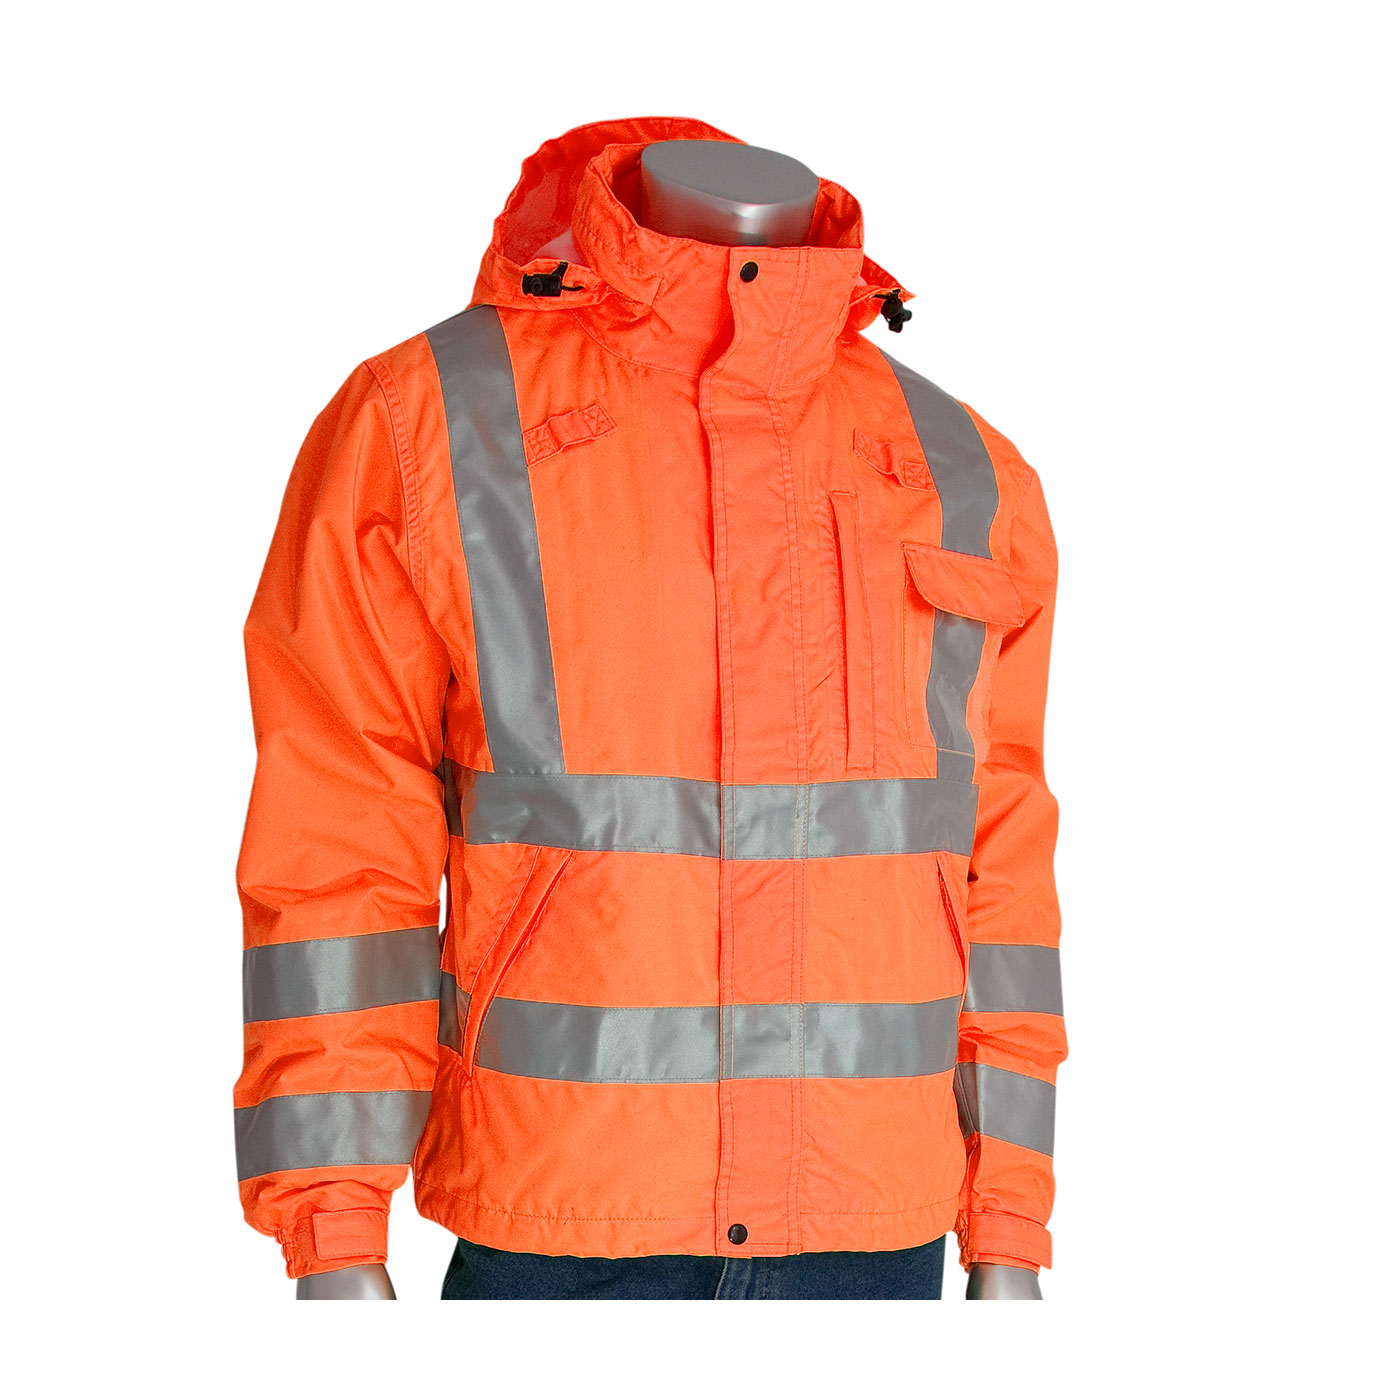 PIP VizPLUS Type R Class 3 Heavy Duty Waterproof Breathable Jacket from Columbia Safety